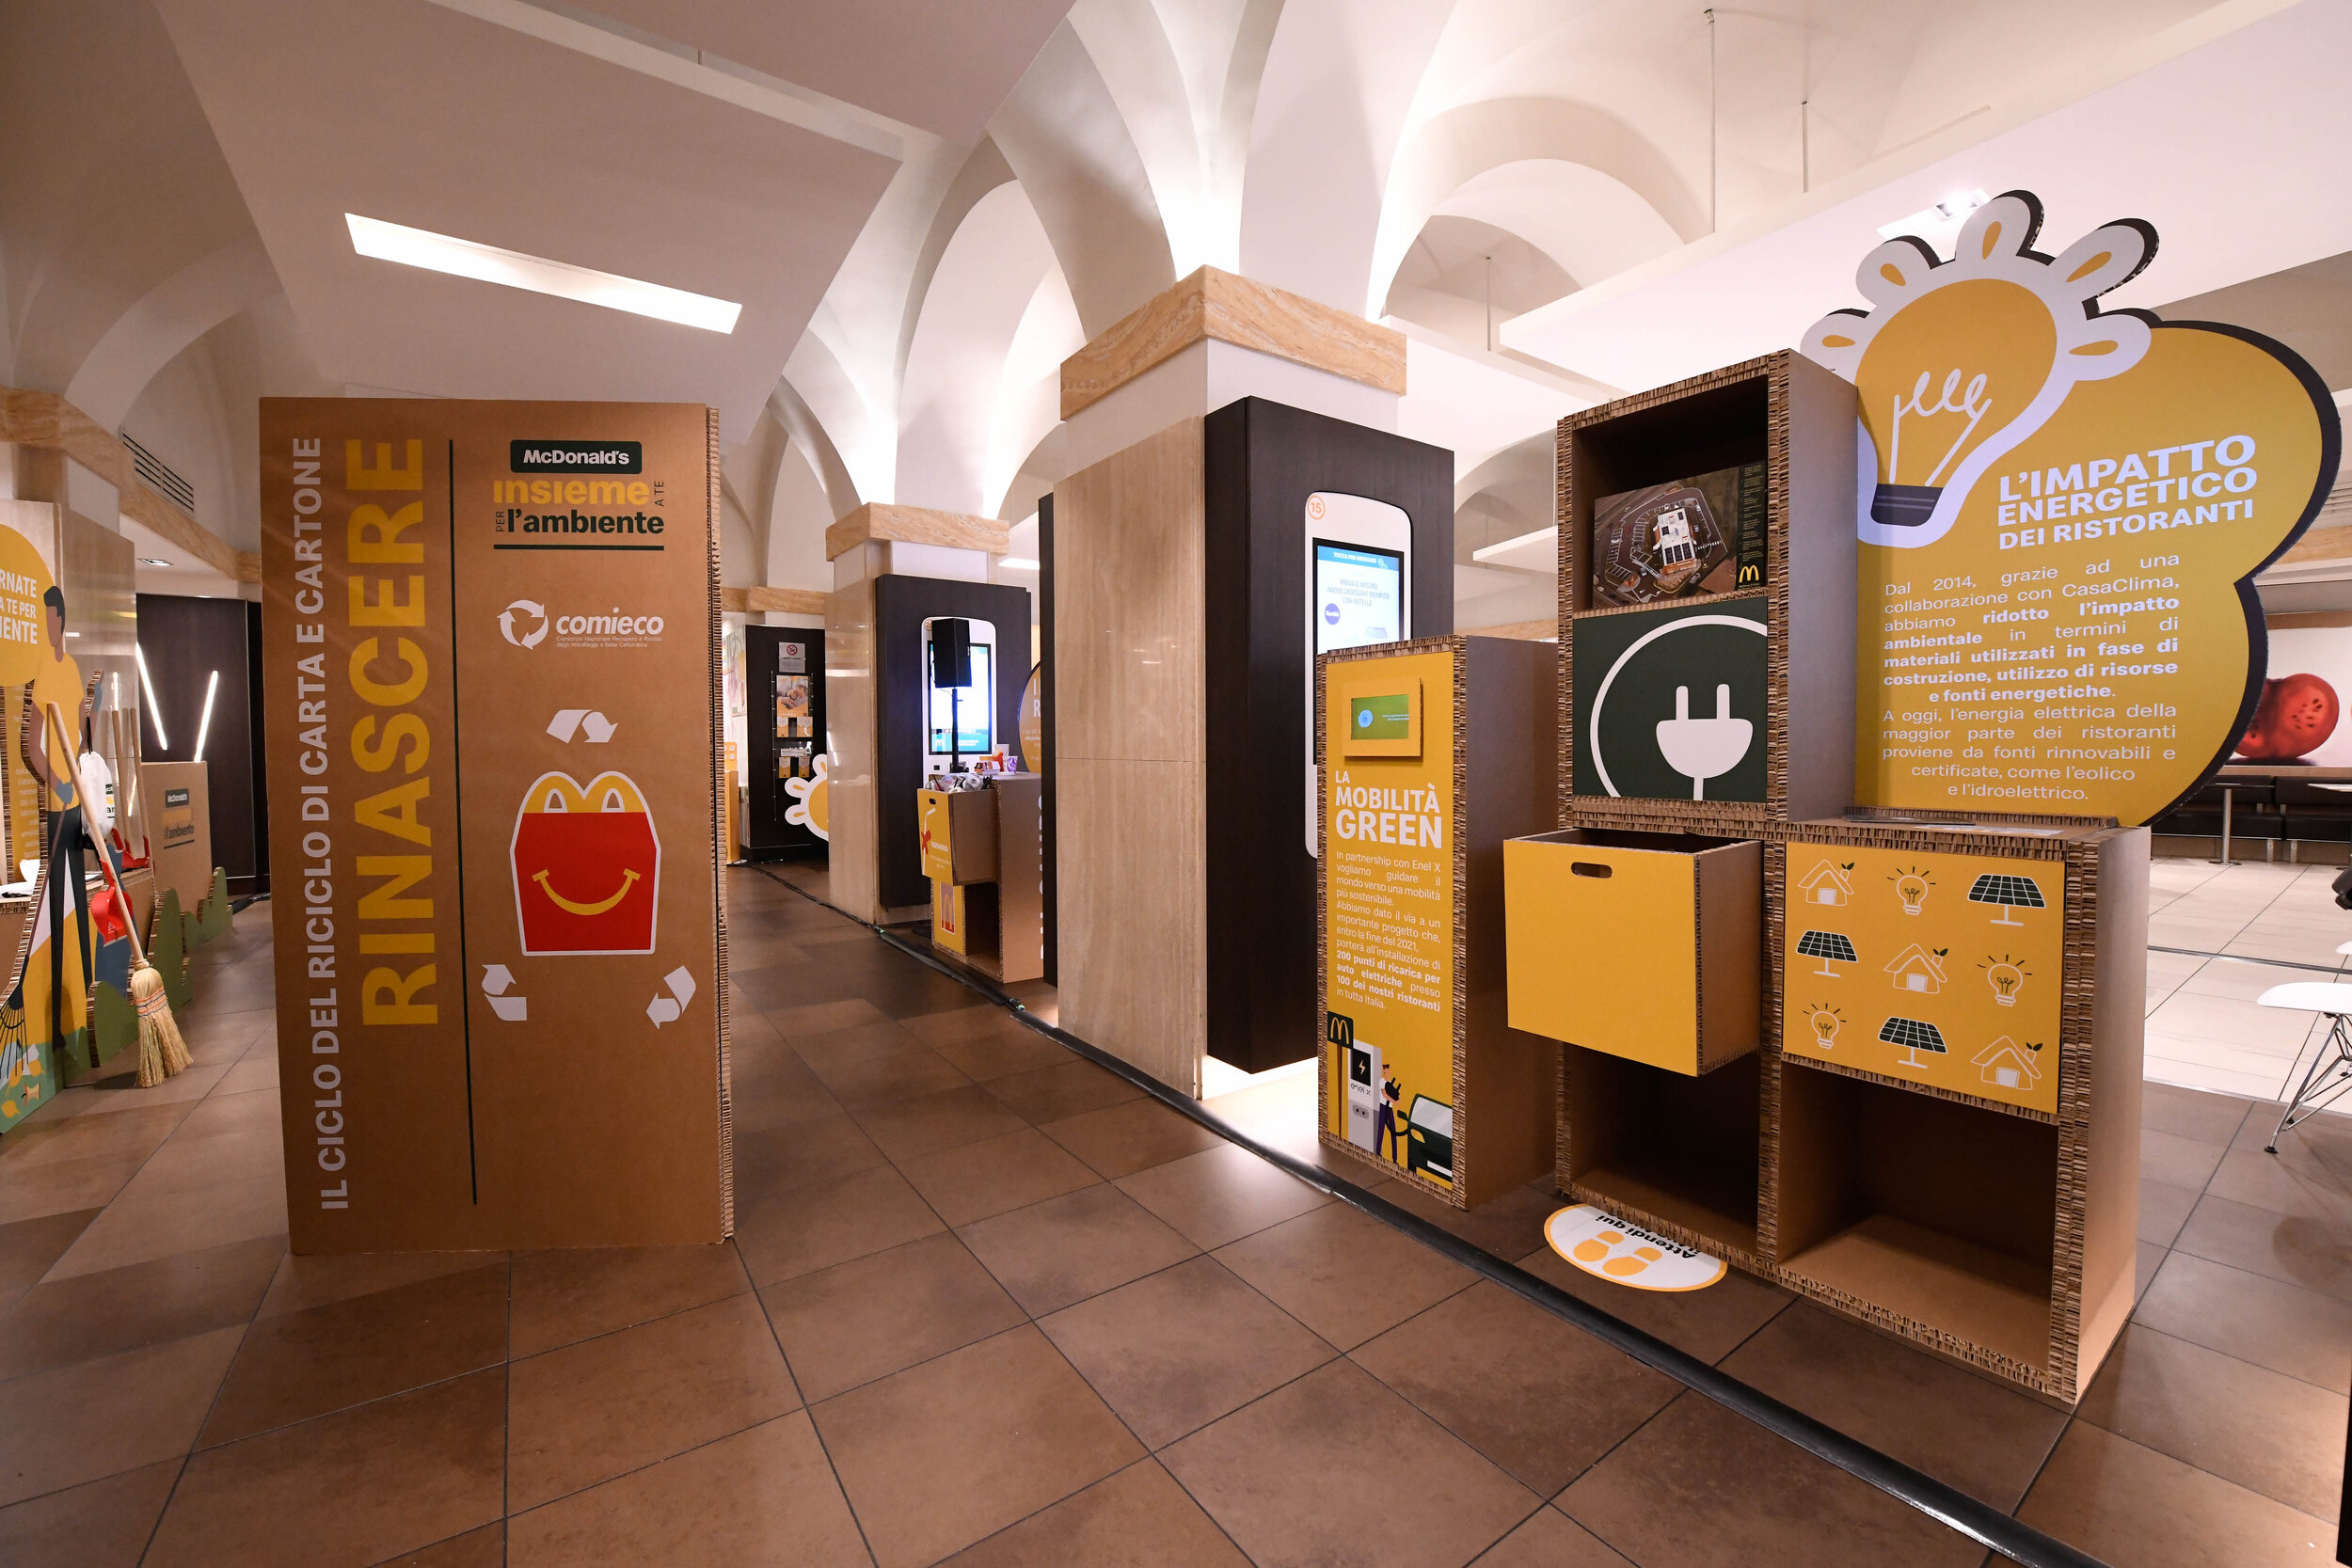 Step Inside Rome's Unique McDonald's: A Fast Food Experience with an Italian Twist